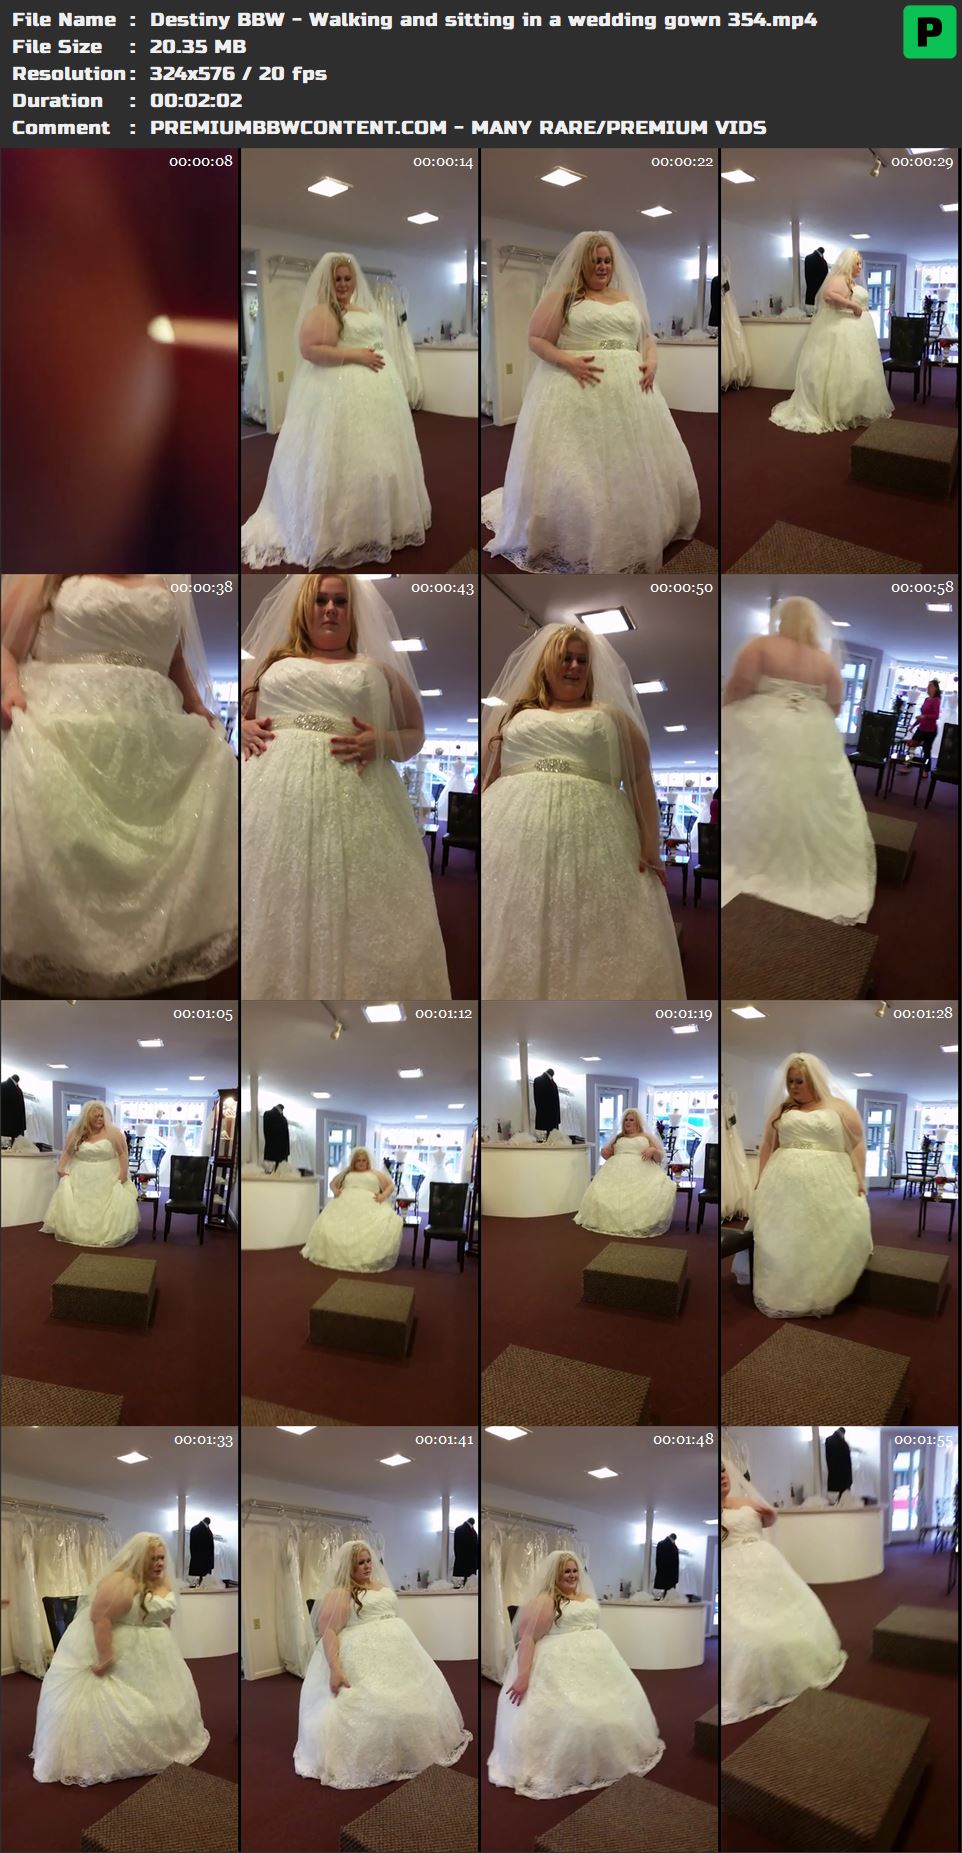 Destiny BBW - Walking and sitting in a wedding gown 354 thumbnails